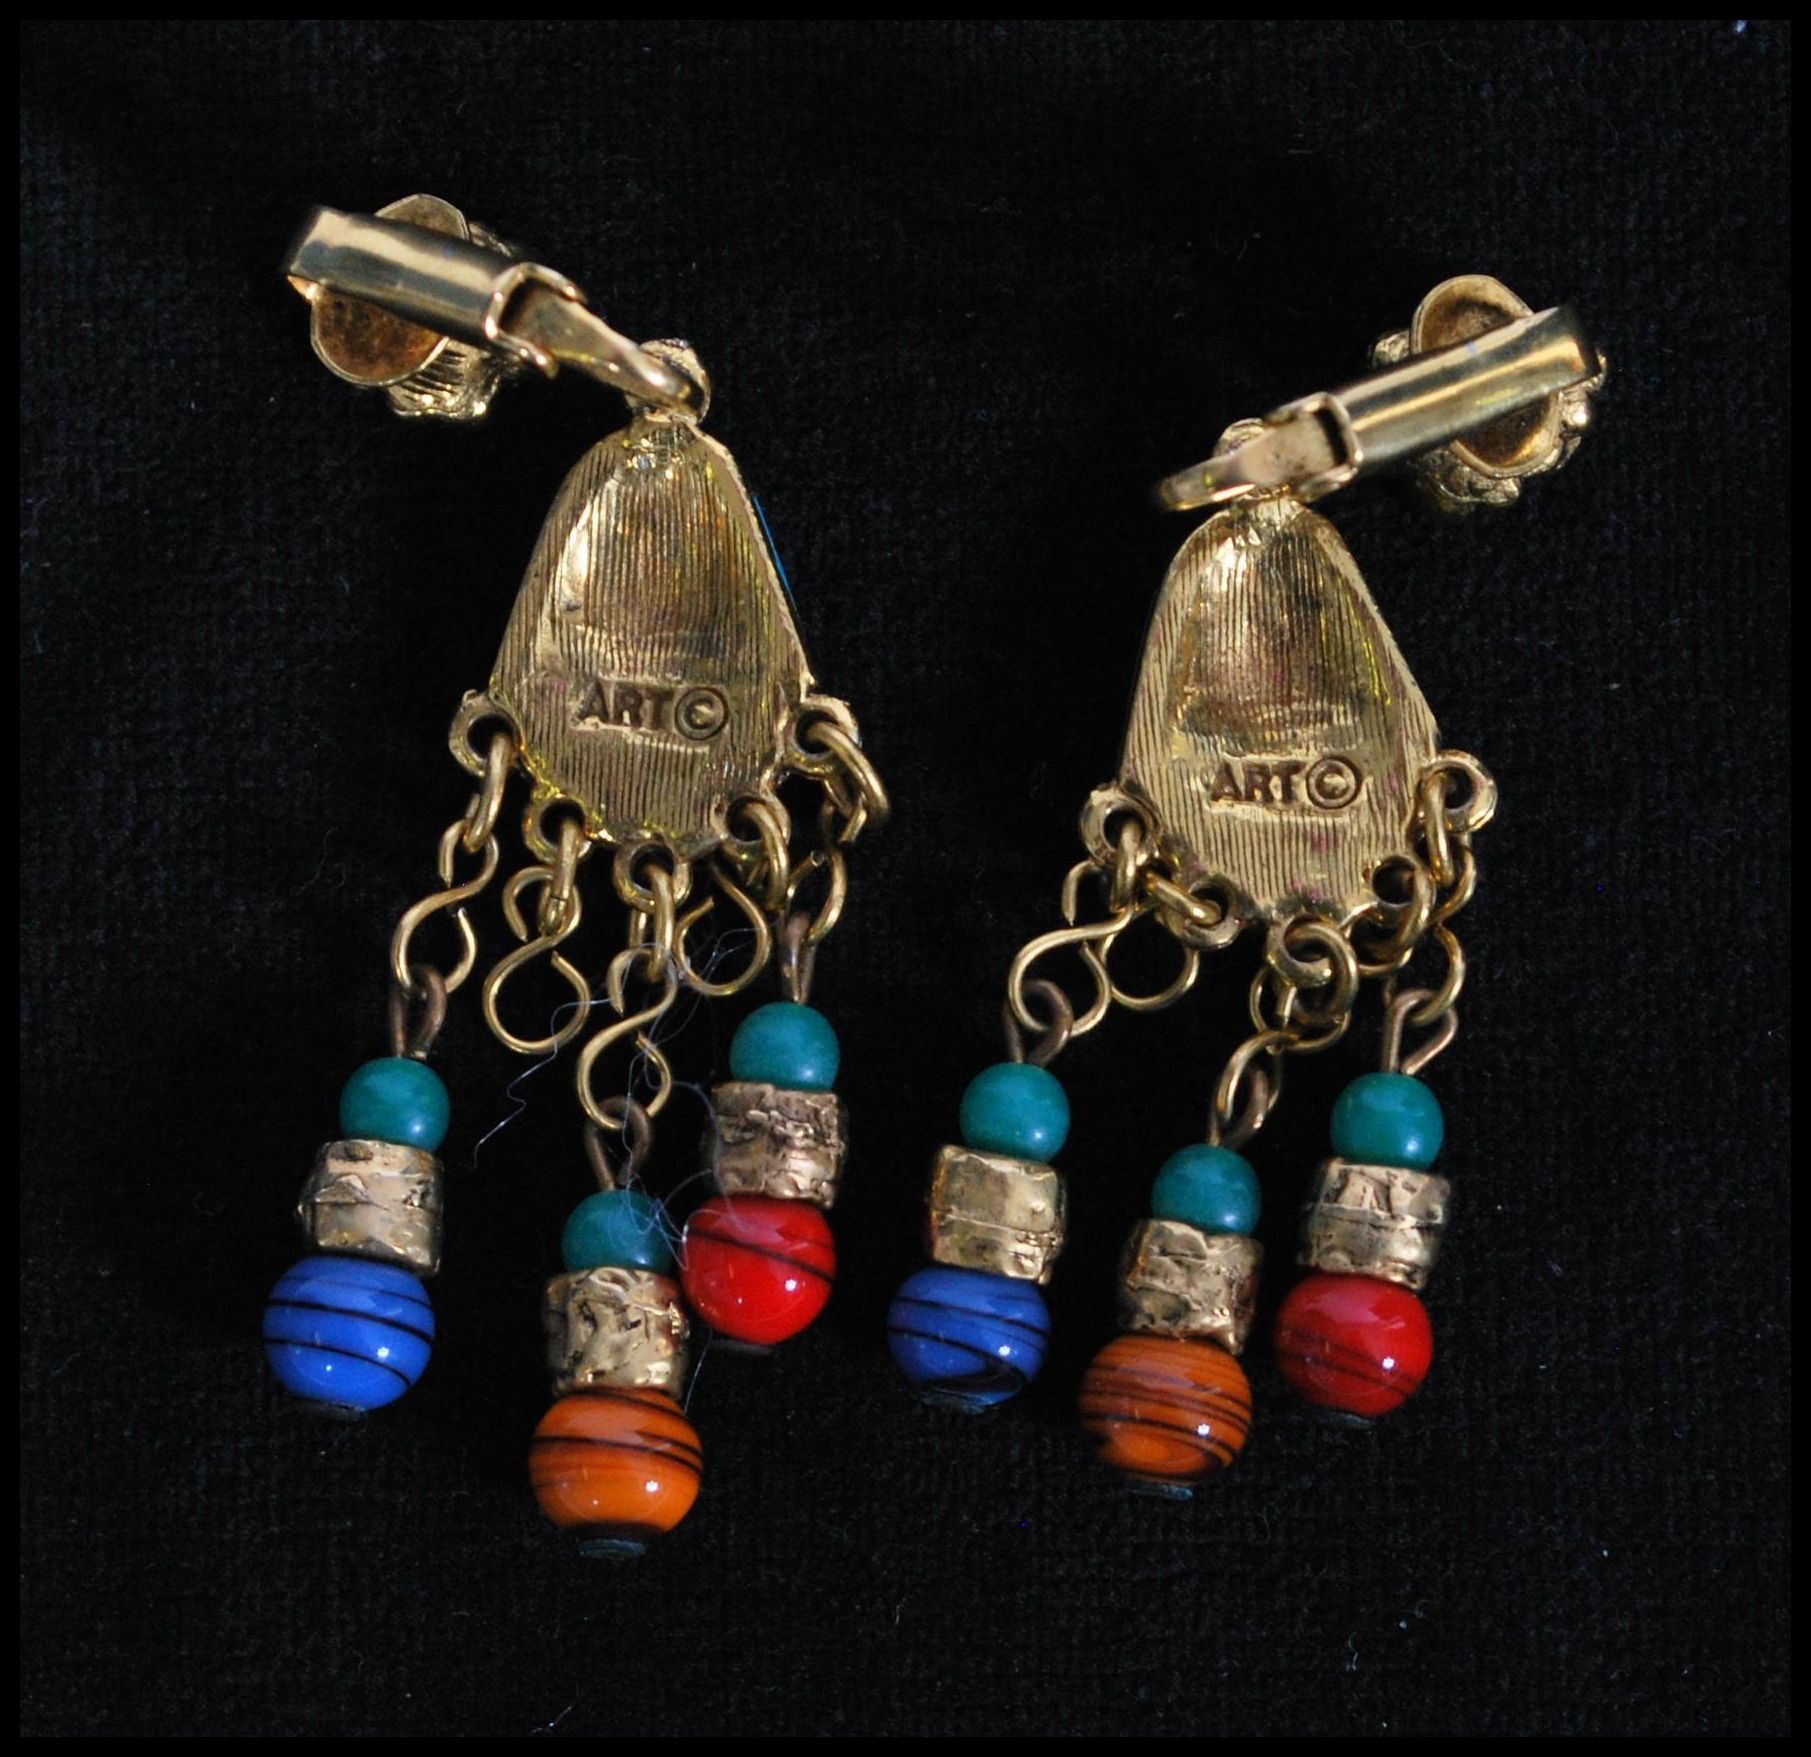 A 1960s signed Art Egyptian revival necklace and earring set by Arthur Pepper. Measures 18 inches - Image 6 of 7